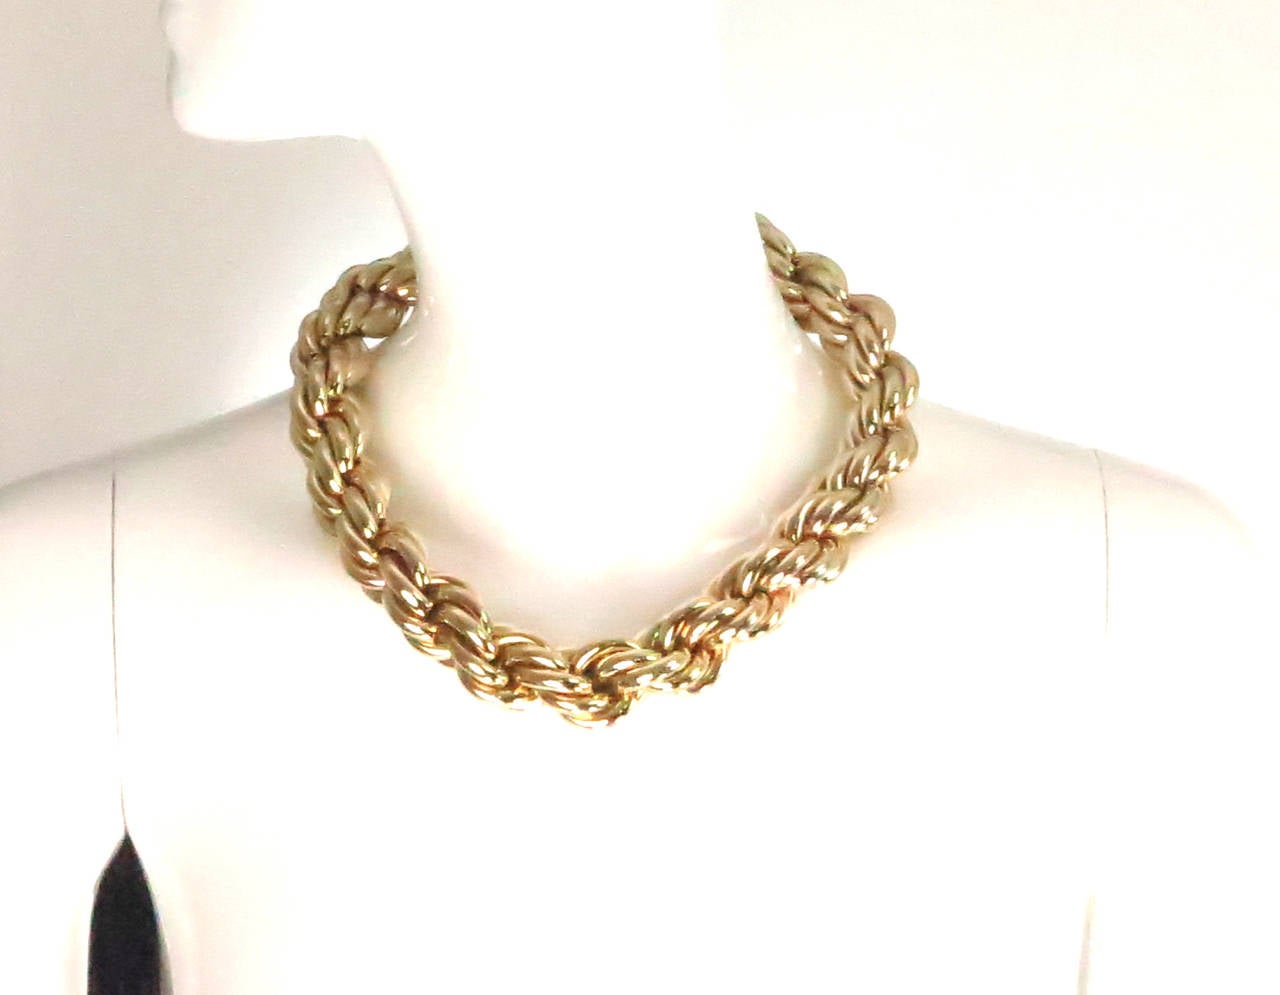 Massive gold link necklace from the 1980s by Napier...A little longer than choker length, this piece is great for filling in a neckline...Good quality costume piece with the look of real...Marked Napier on the attached hang tag...

Measurements